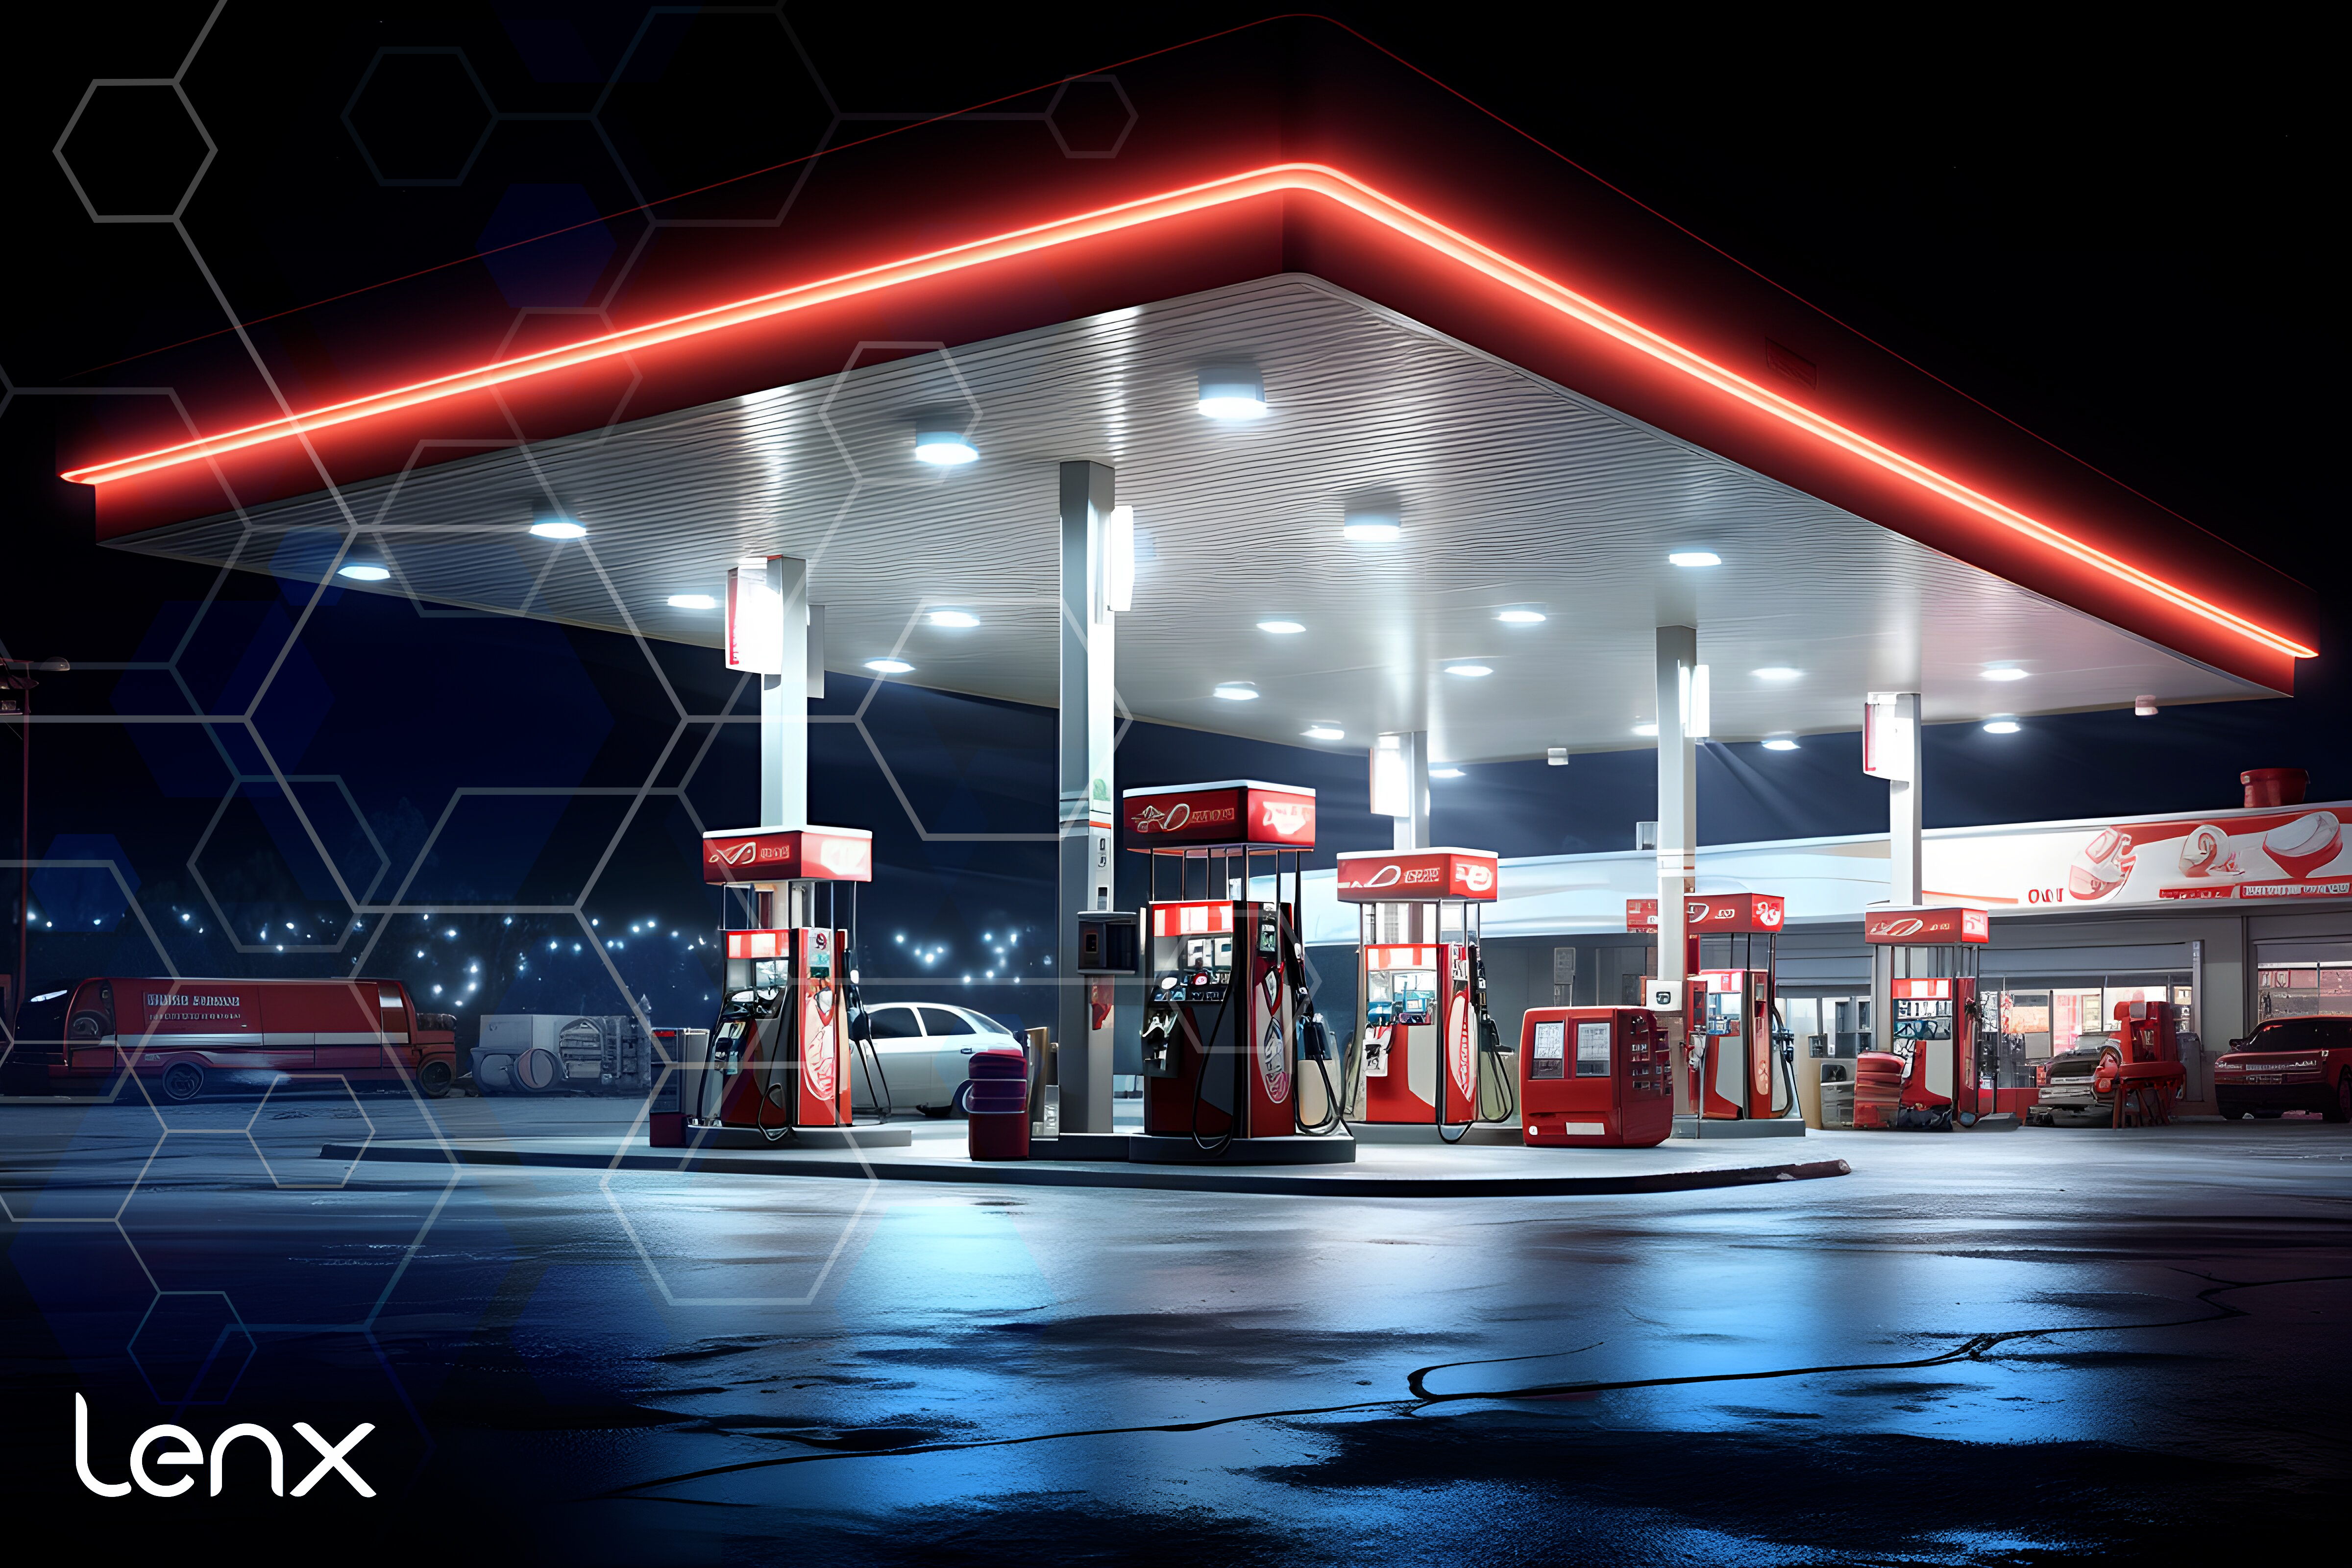 AI Security and Gun Detection's Role In Helping Dissuade Gas Station Crimes